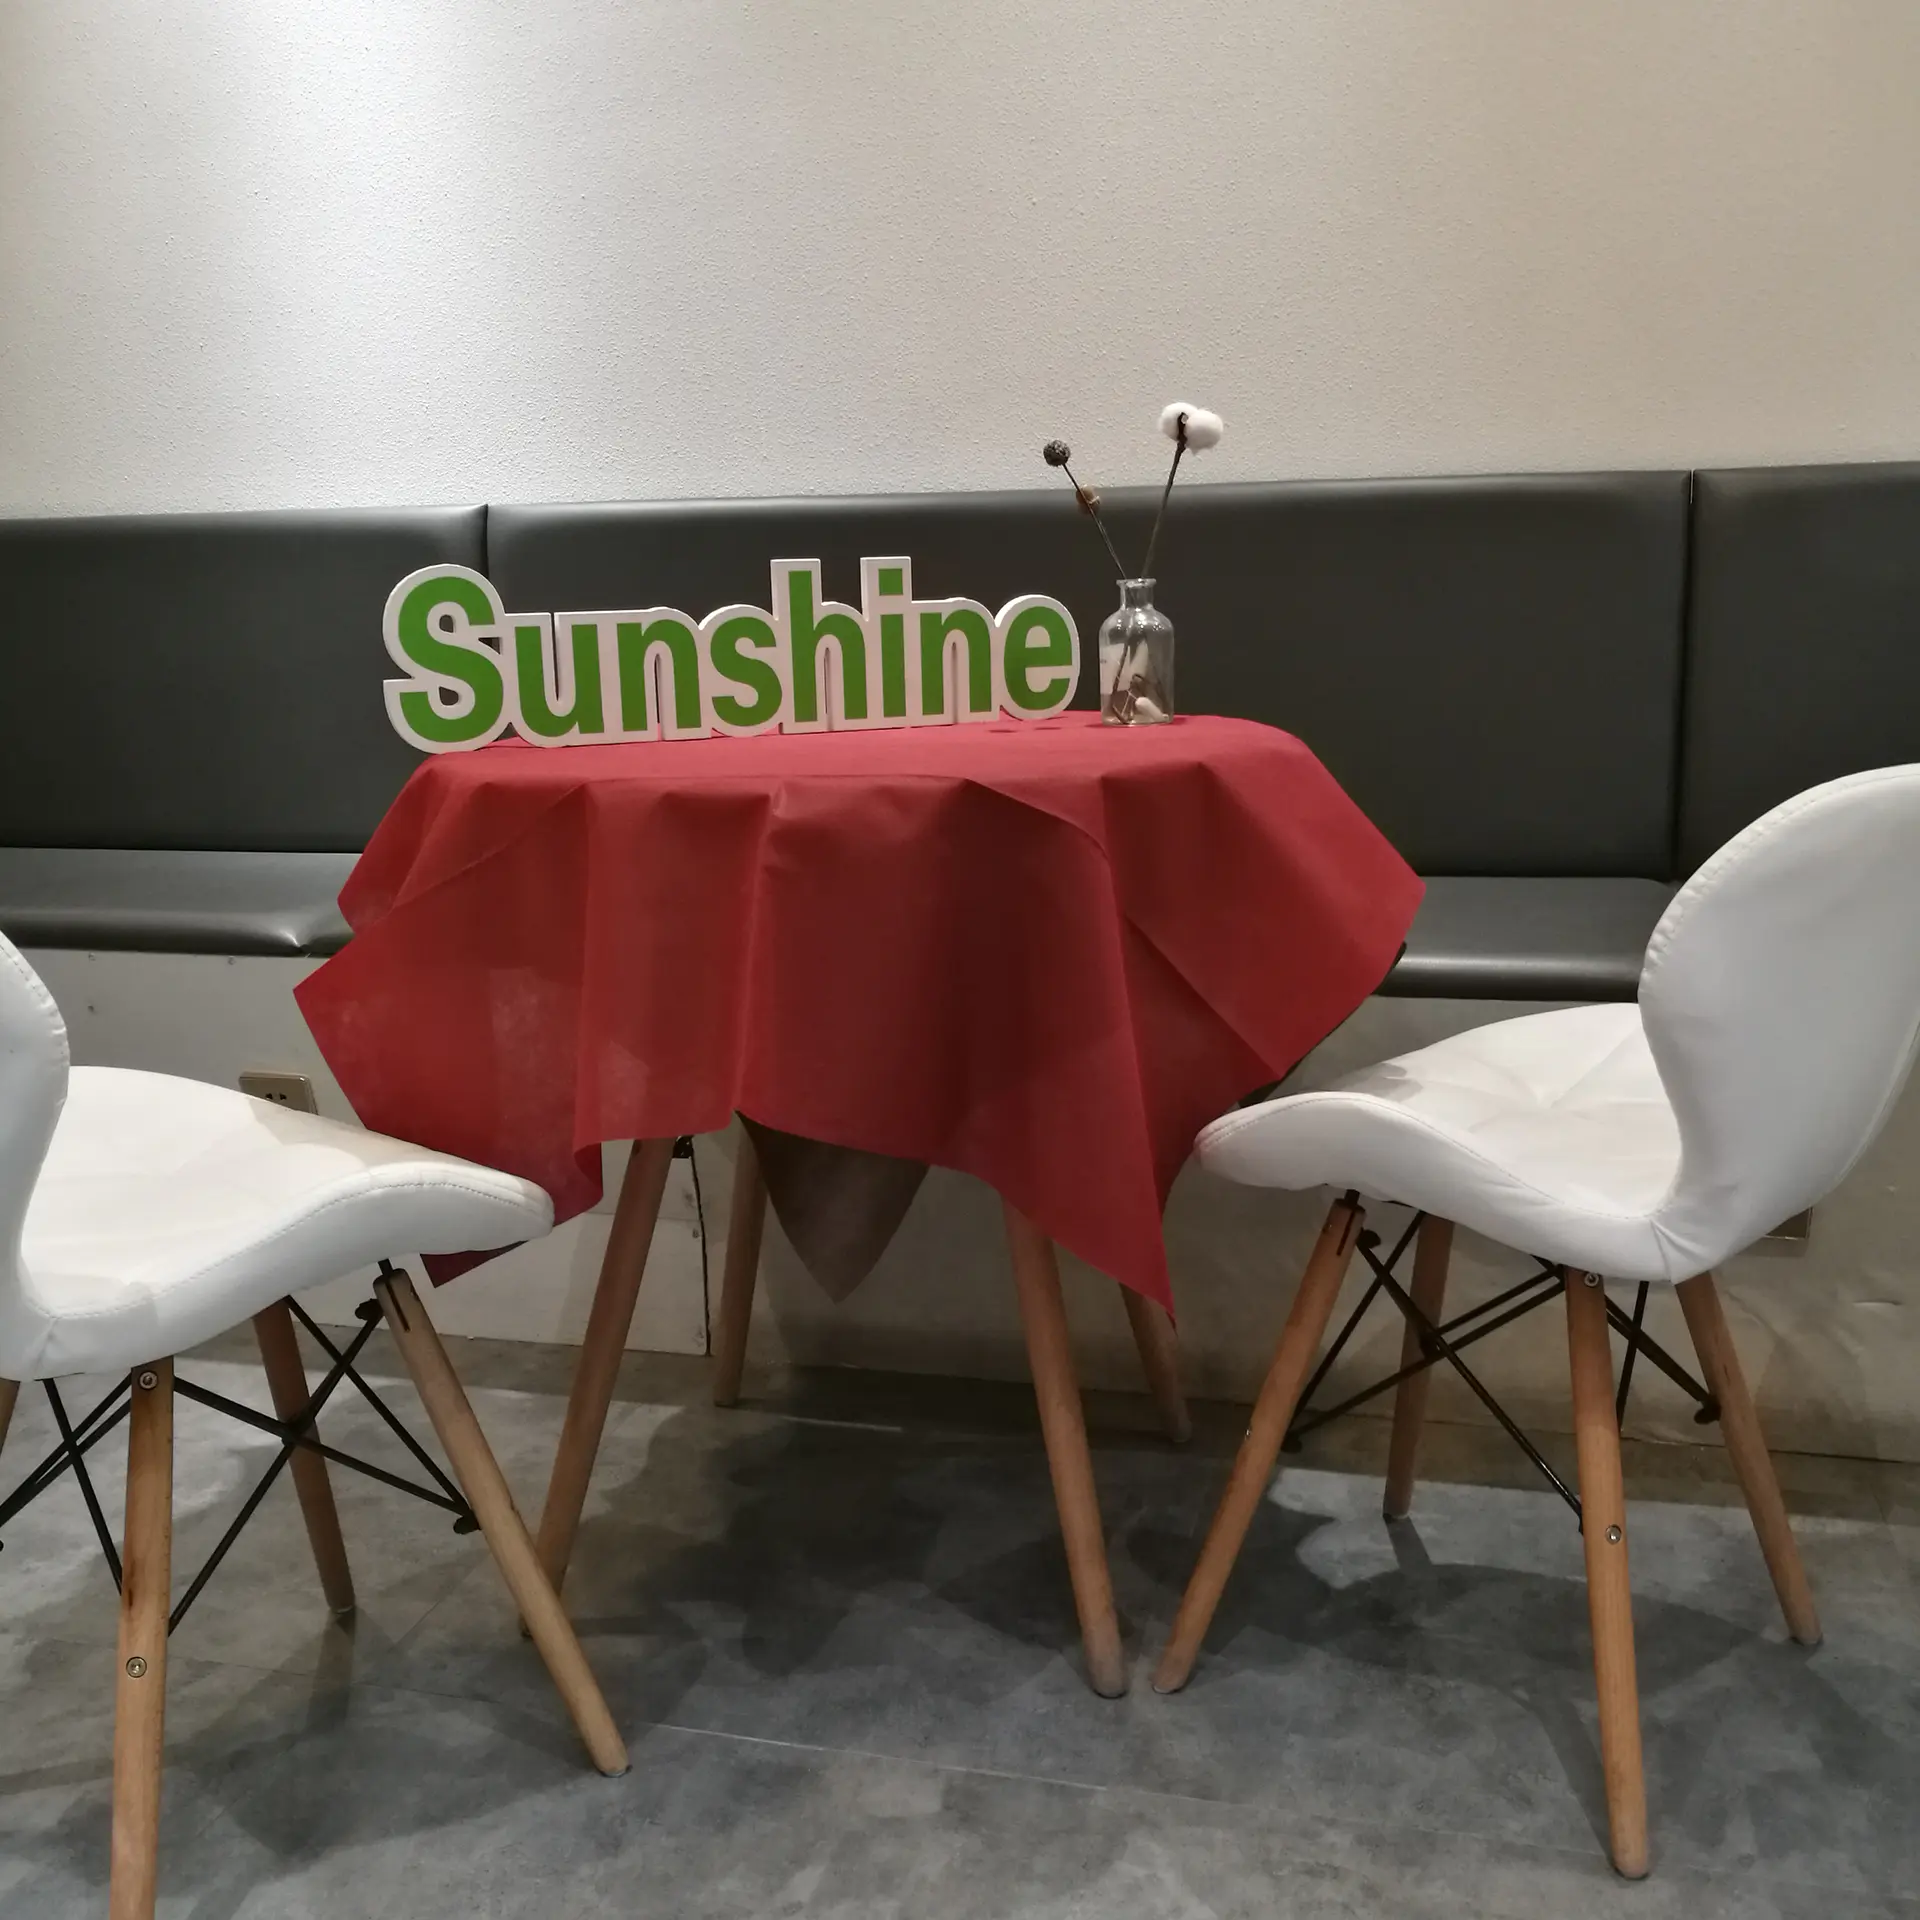 Sunshine water proof table covers